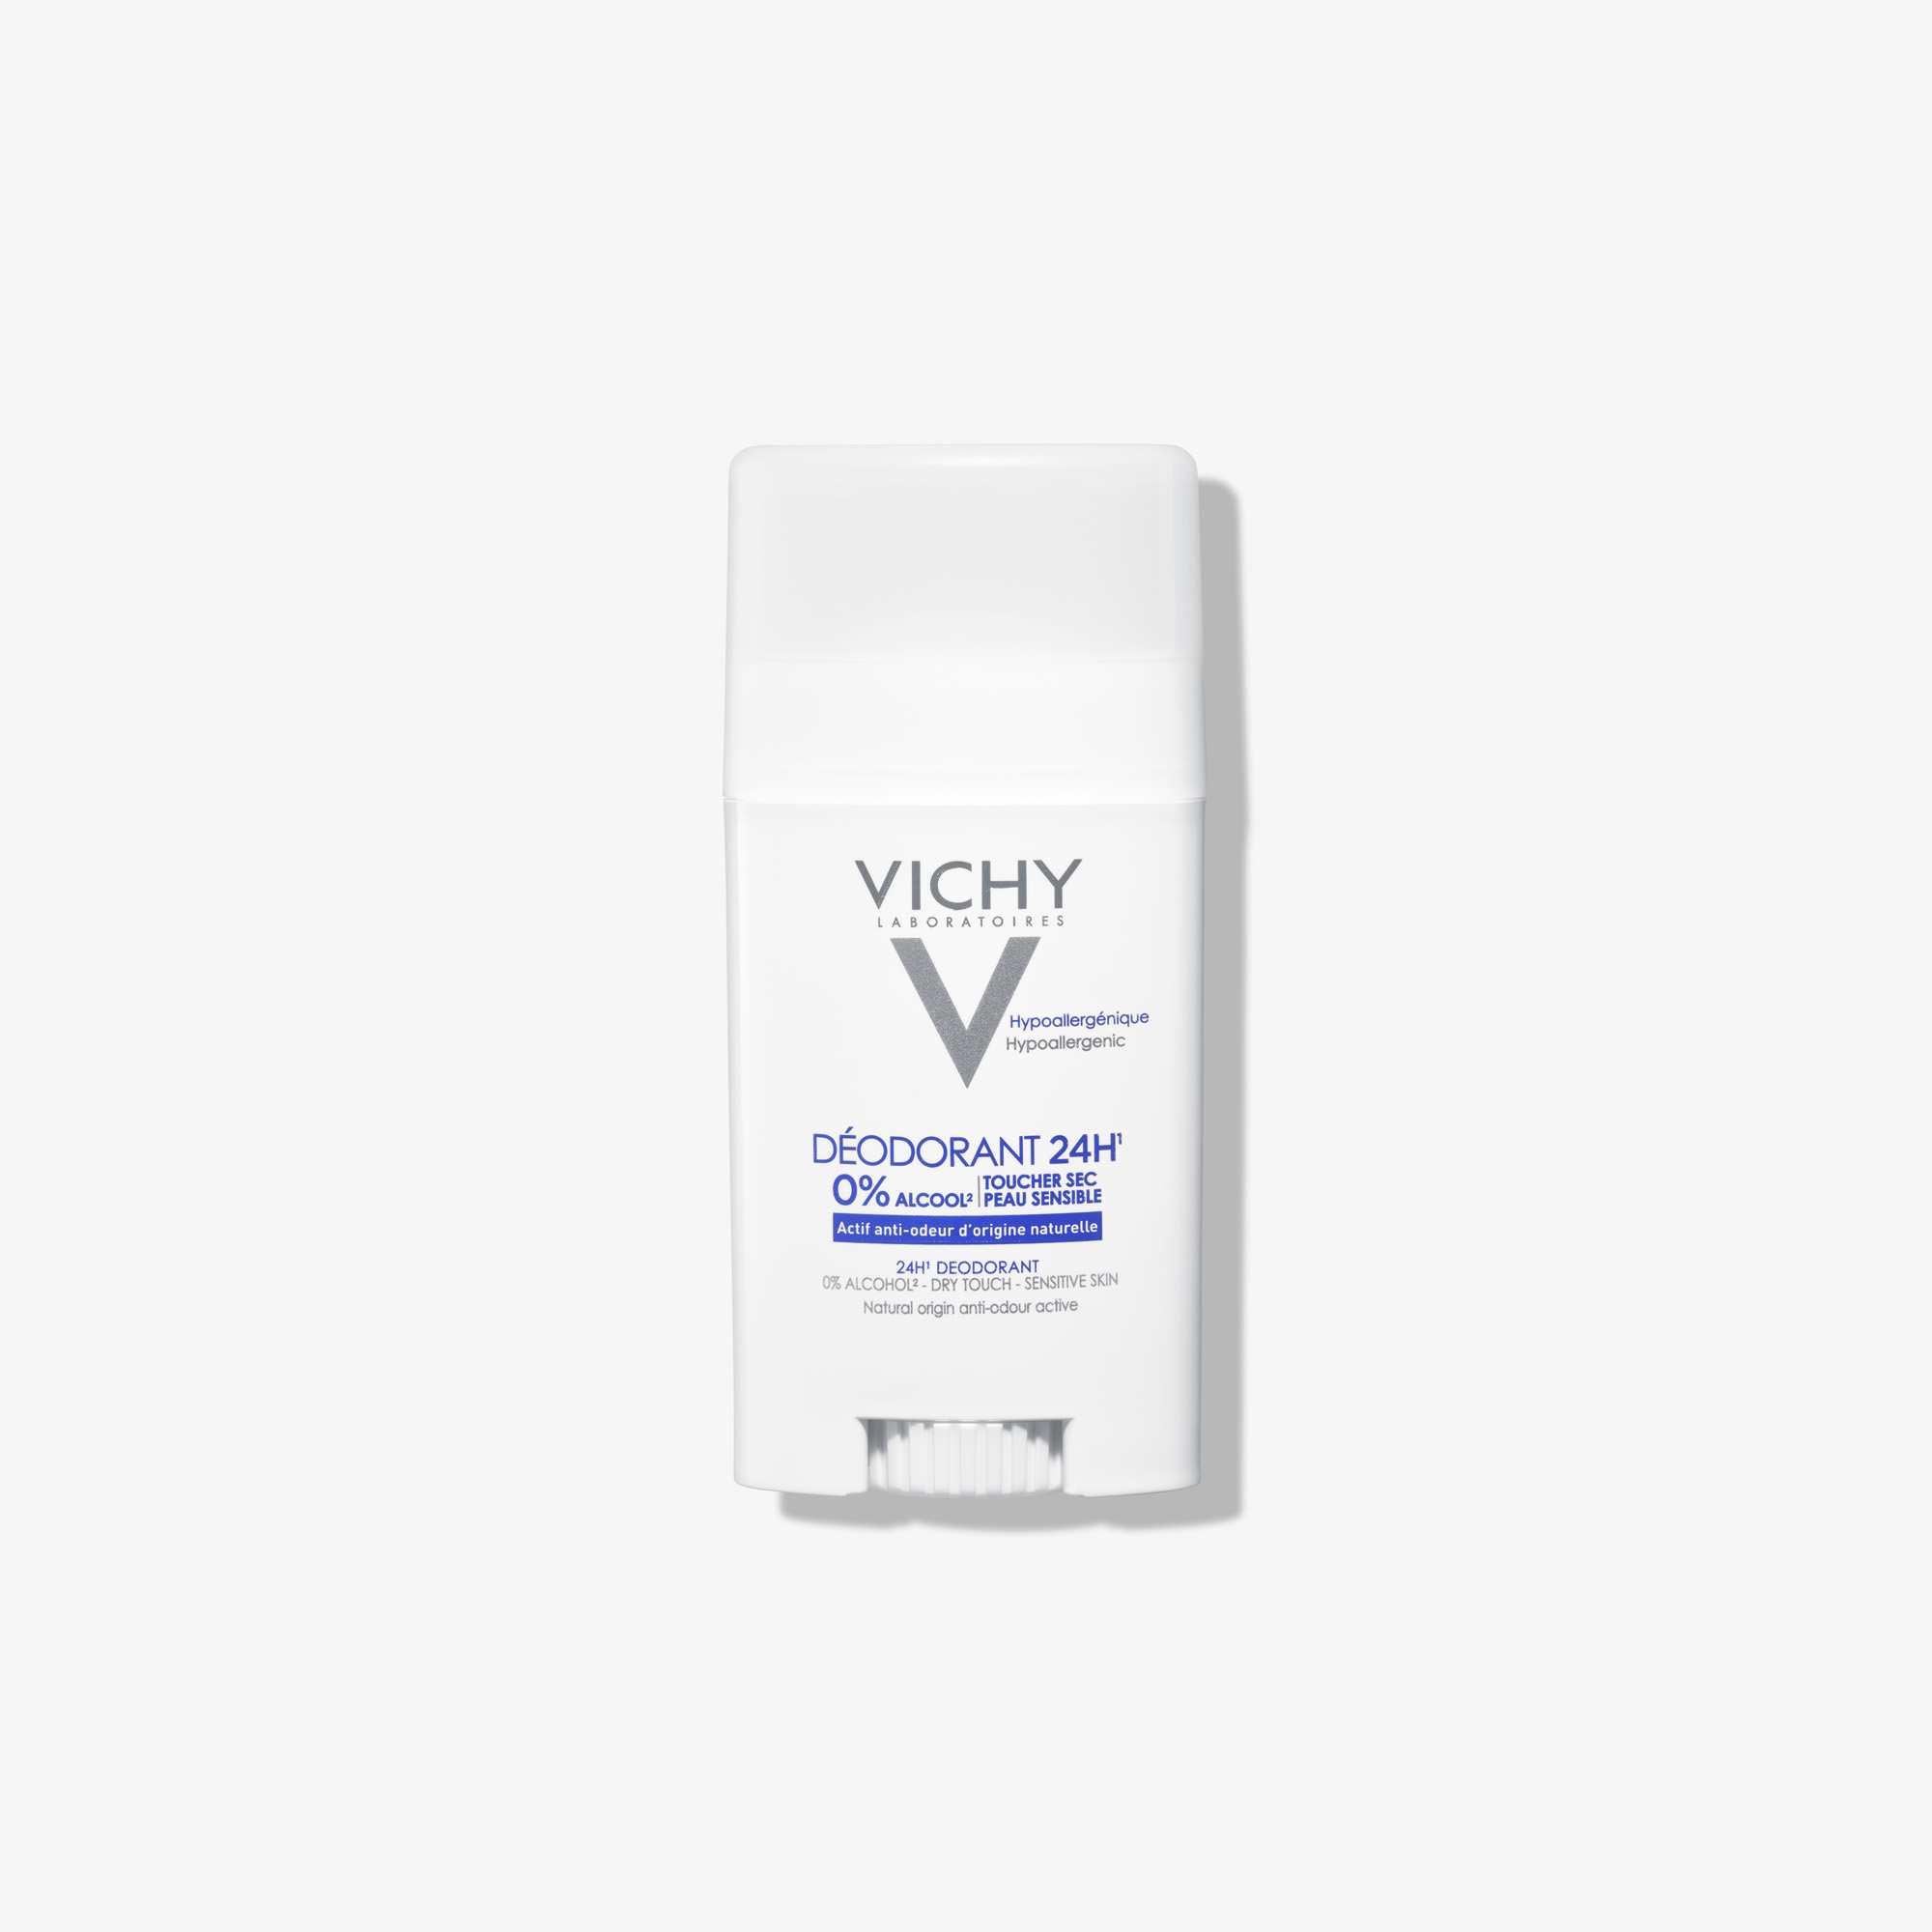 VICHY_DEO_24H_STICK_DRY_TOUCH